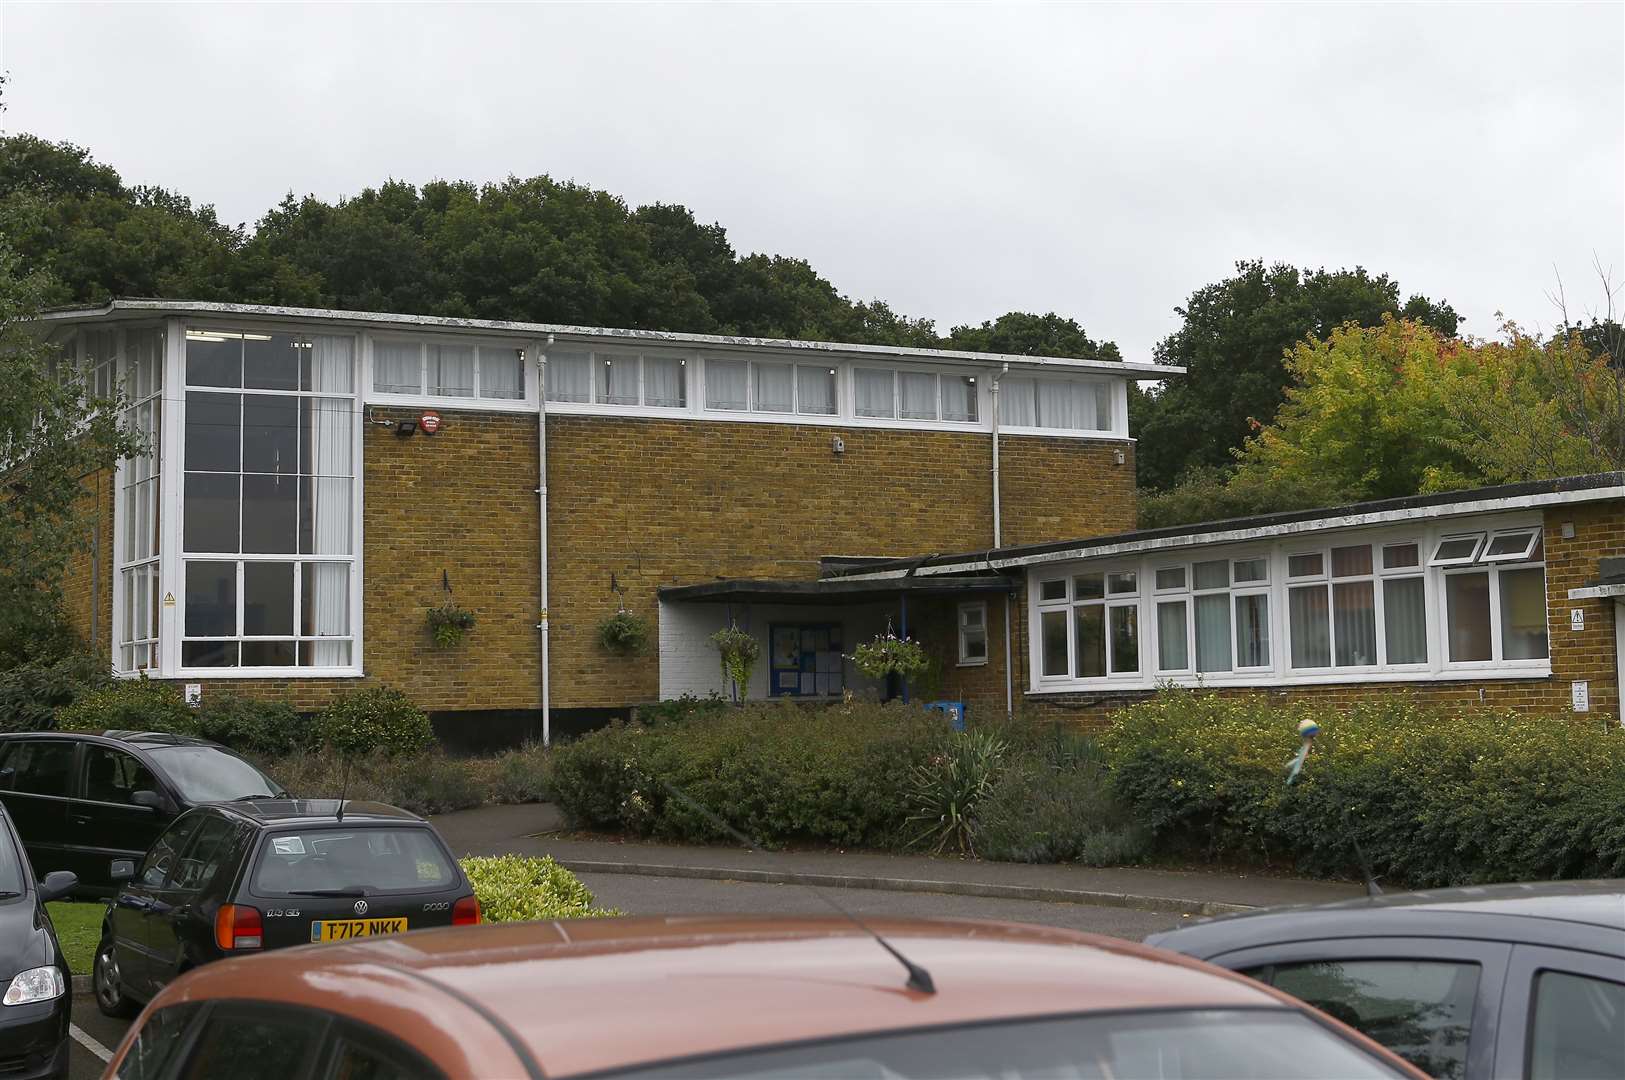 Parkside Primary School has been rated 'requires improvement' by Ofsted